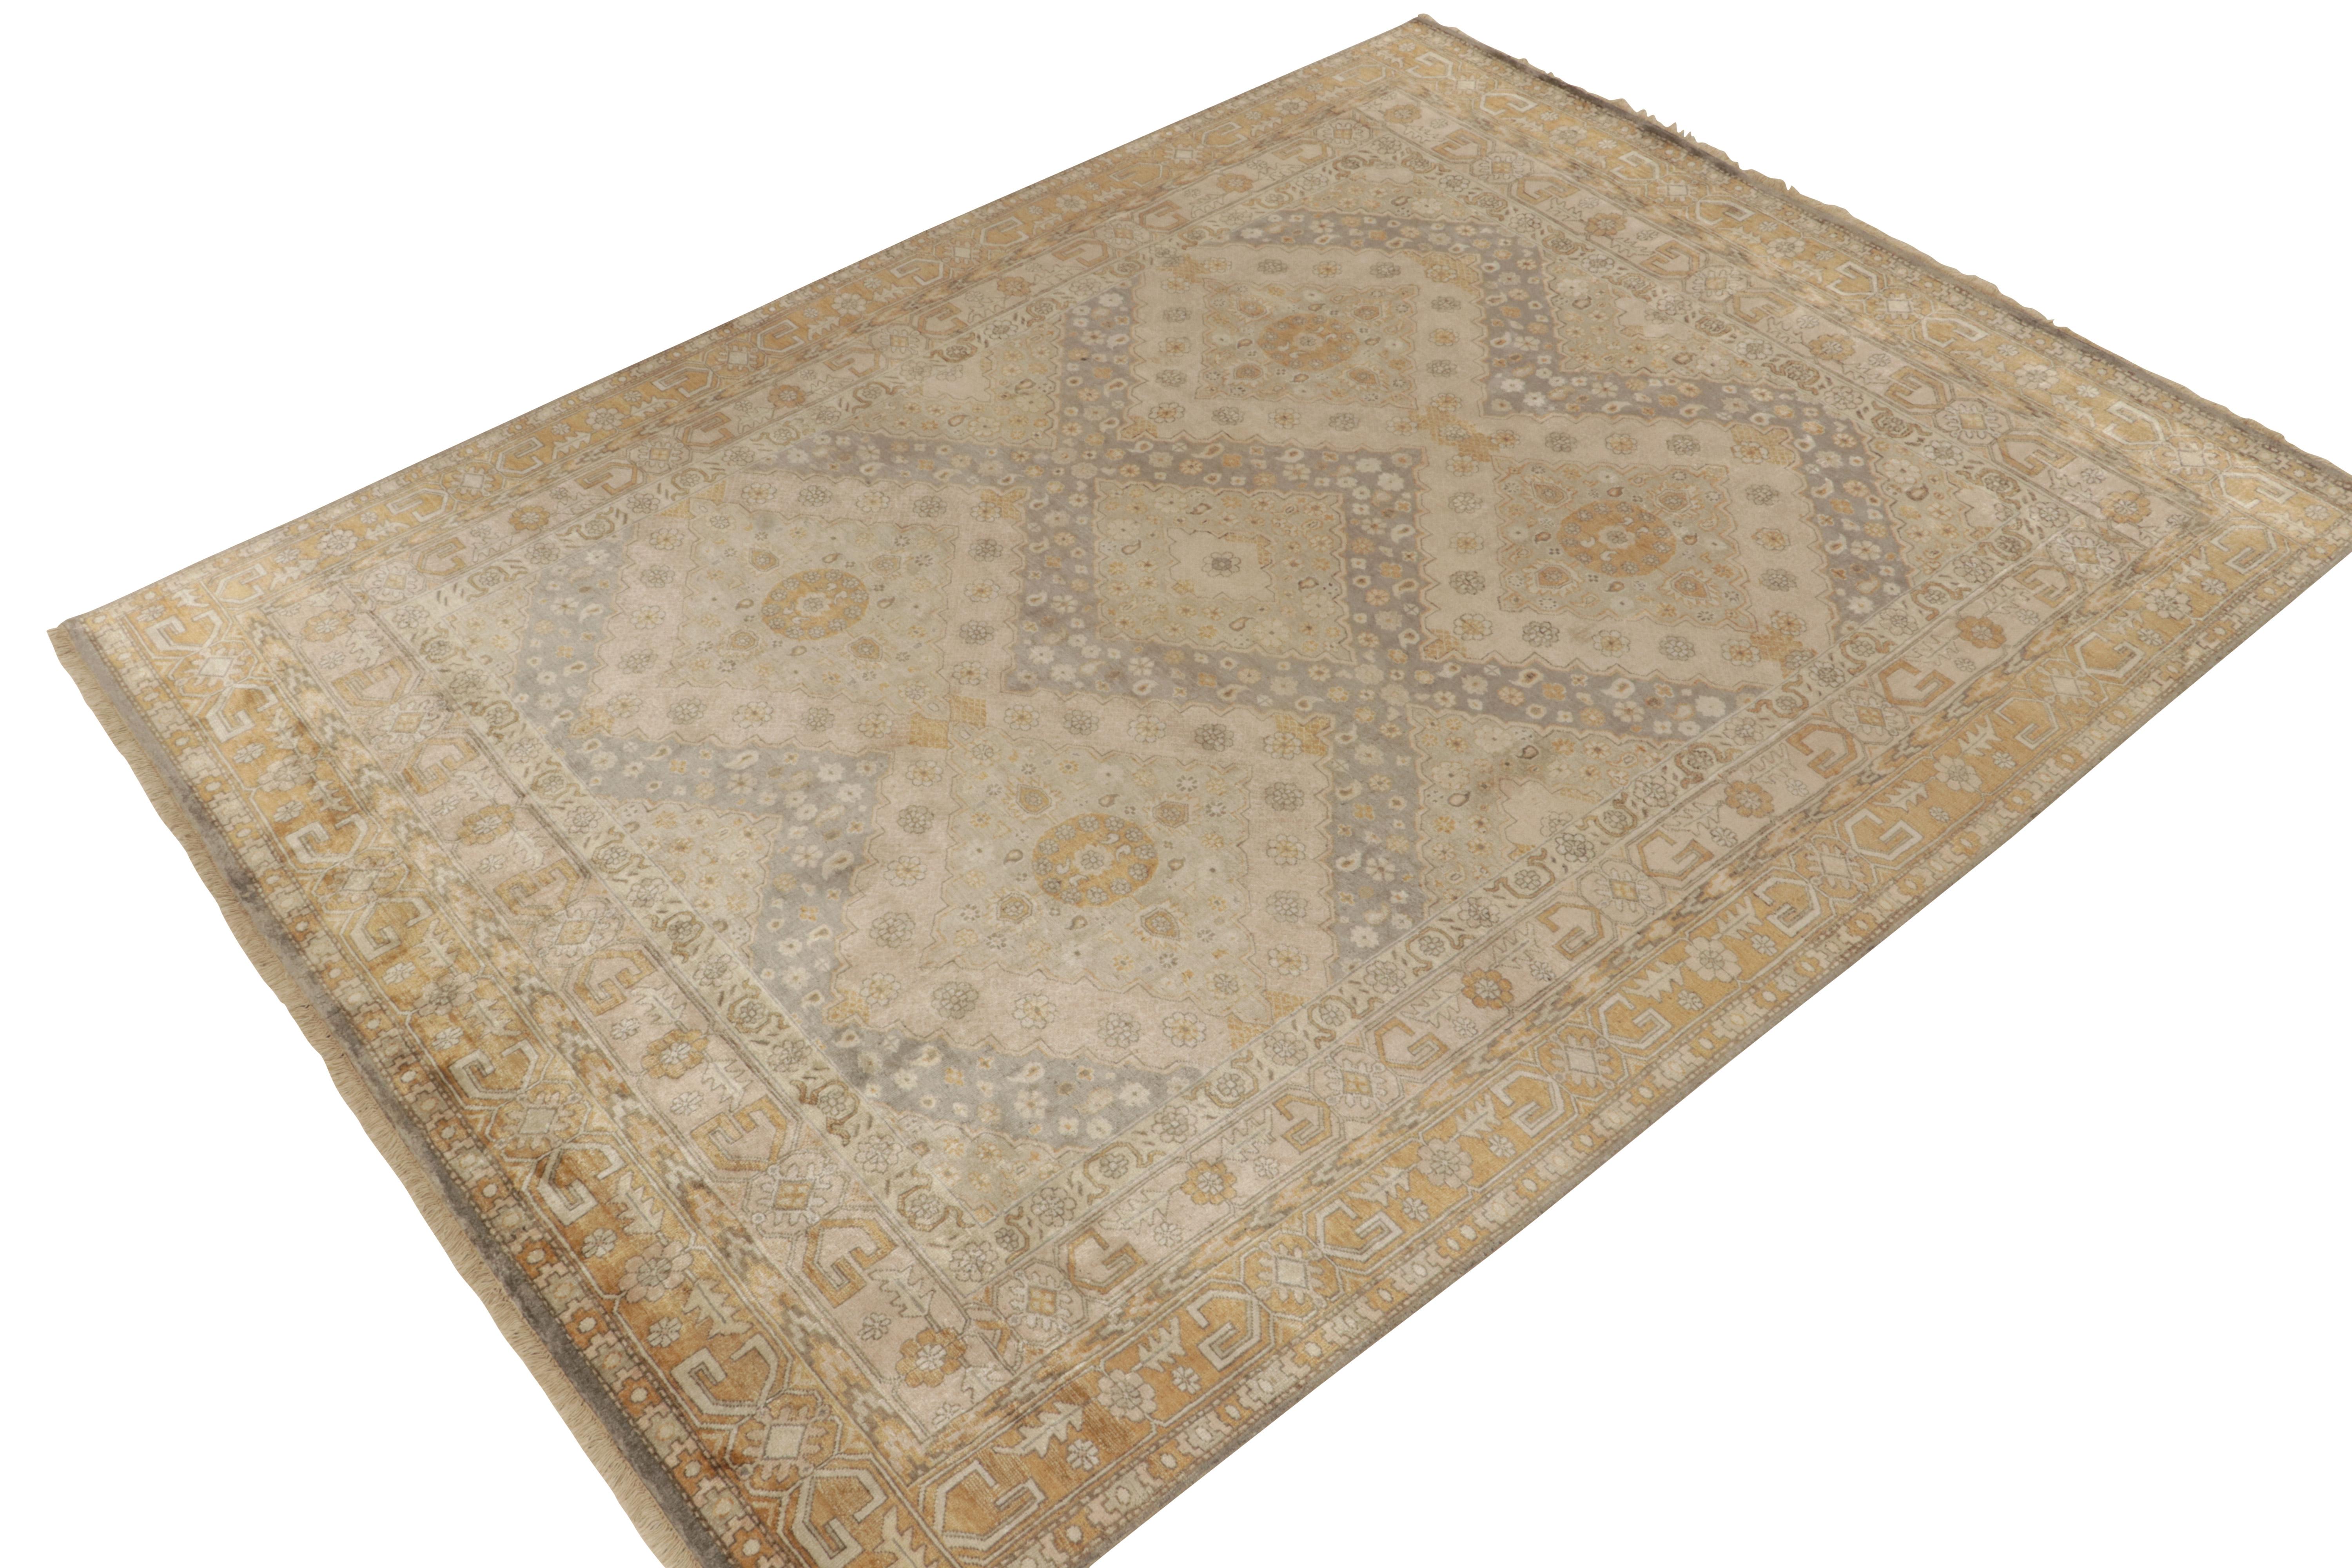 Hand-knotted in luxurious silk, this 9x12 contemporary rug from our Modern Classics collection marries a unique array of regal inspirations. Marrying Khotan and Moroccan sensibilities, the pattern harmonizes diamond and trellises with meticulous